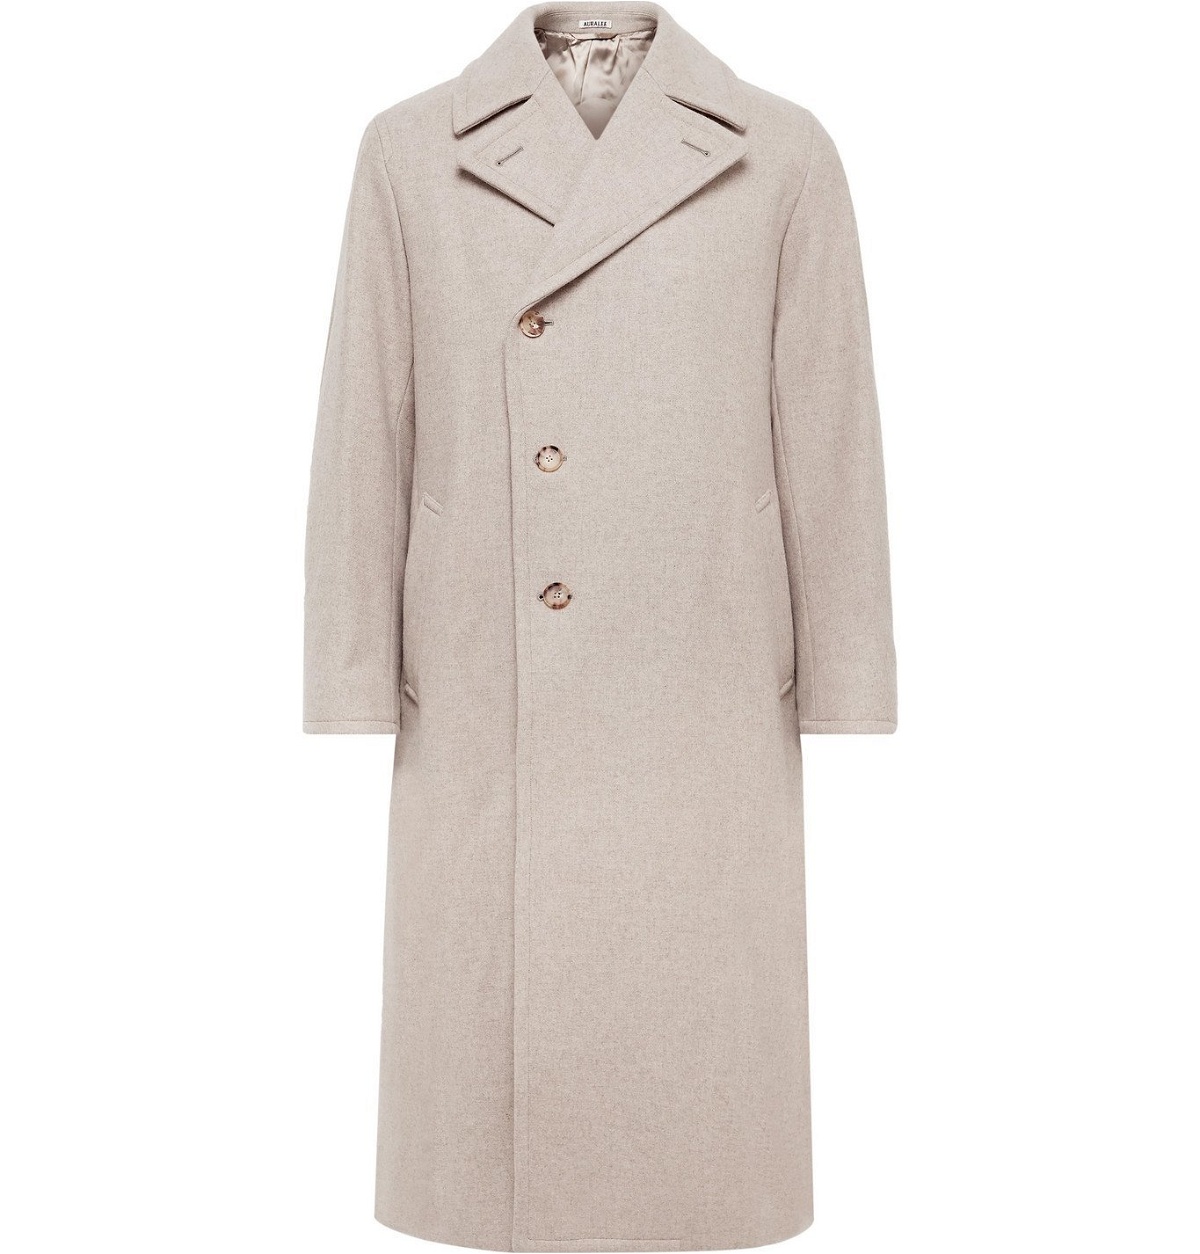 Auralee - Belted Double-Breasted Mélange Wool Coat - Neutrals Auralee